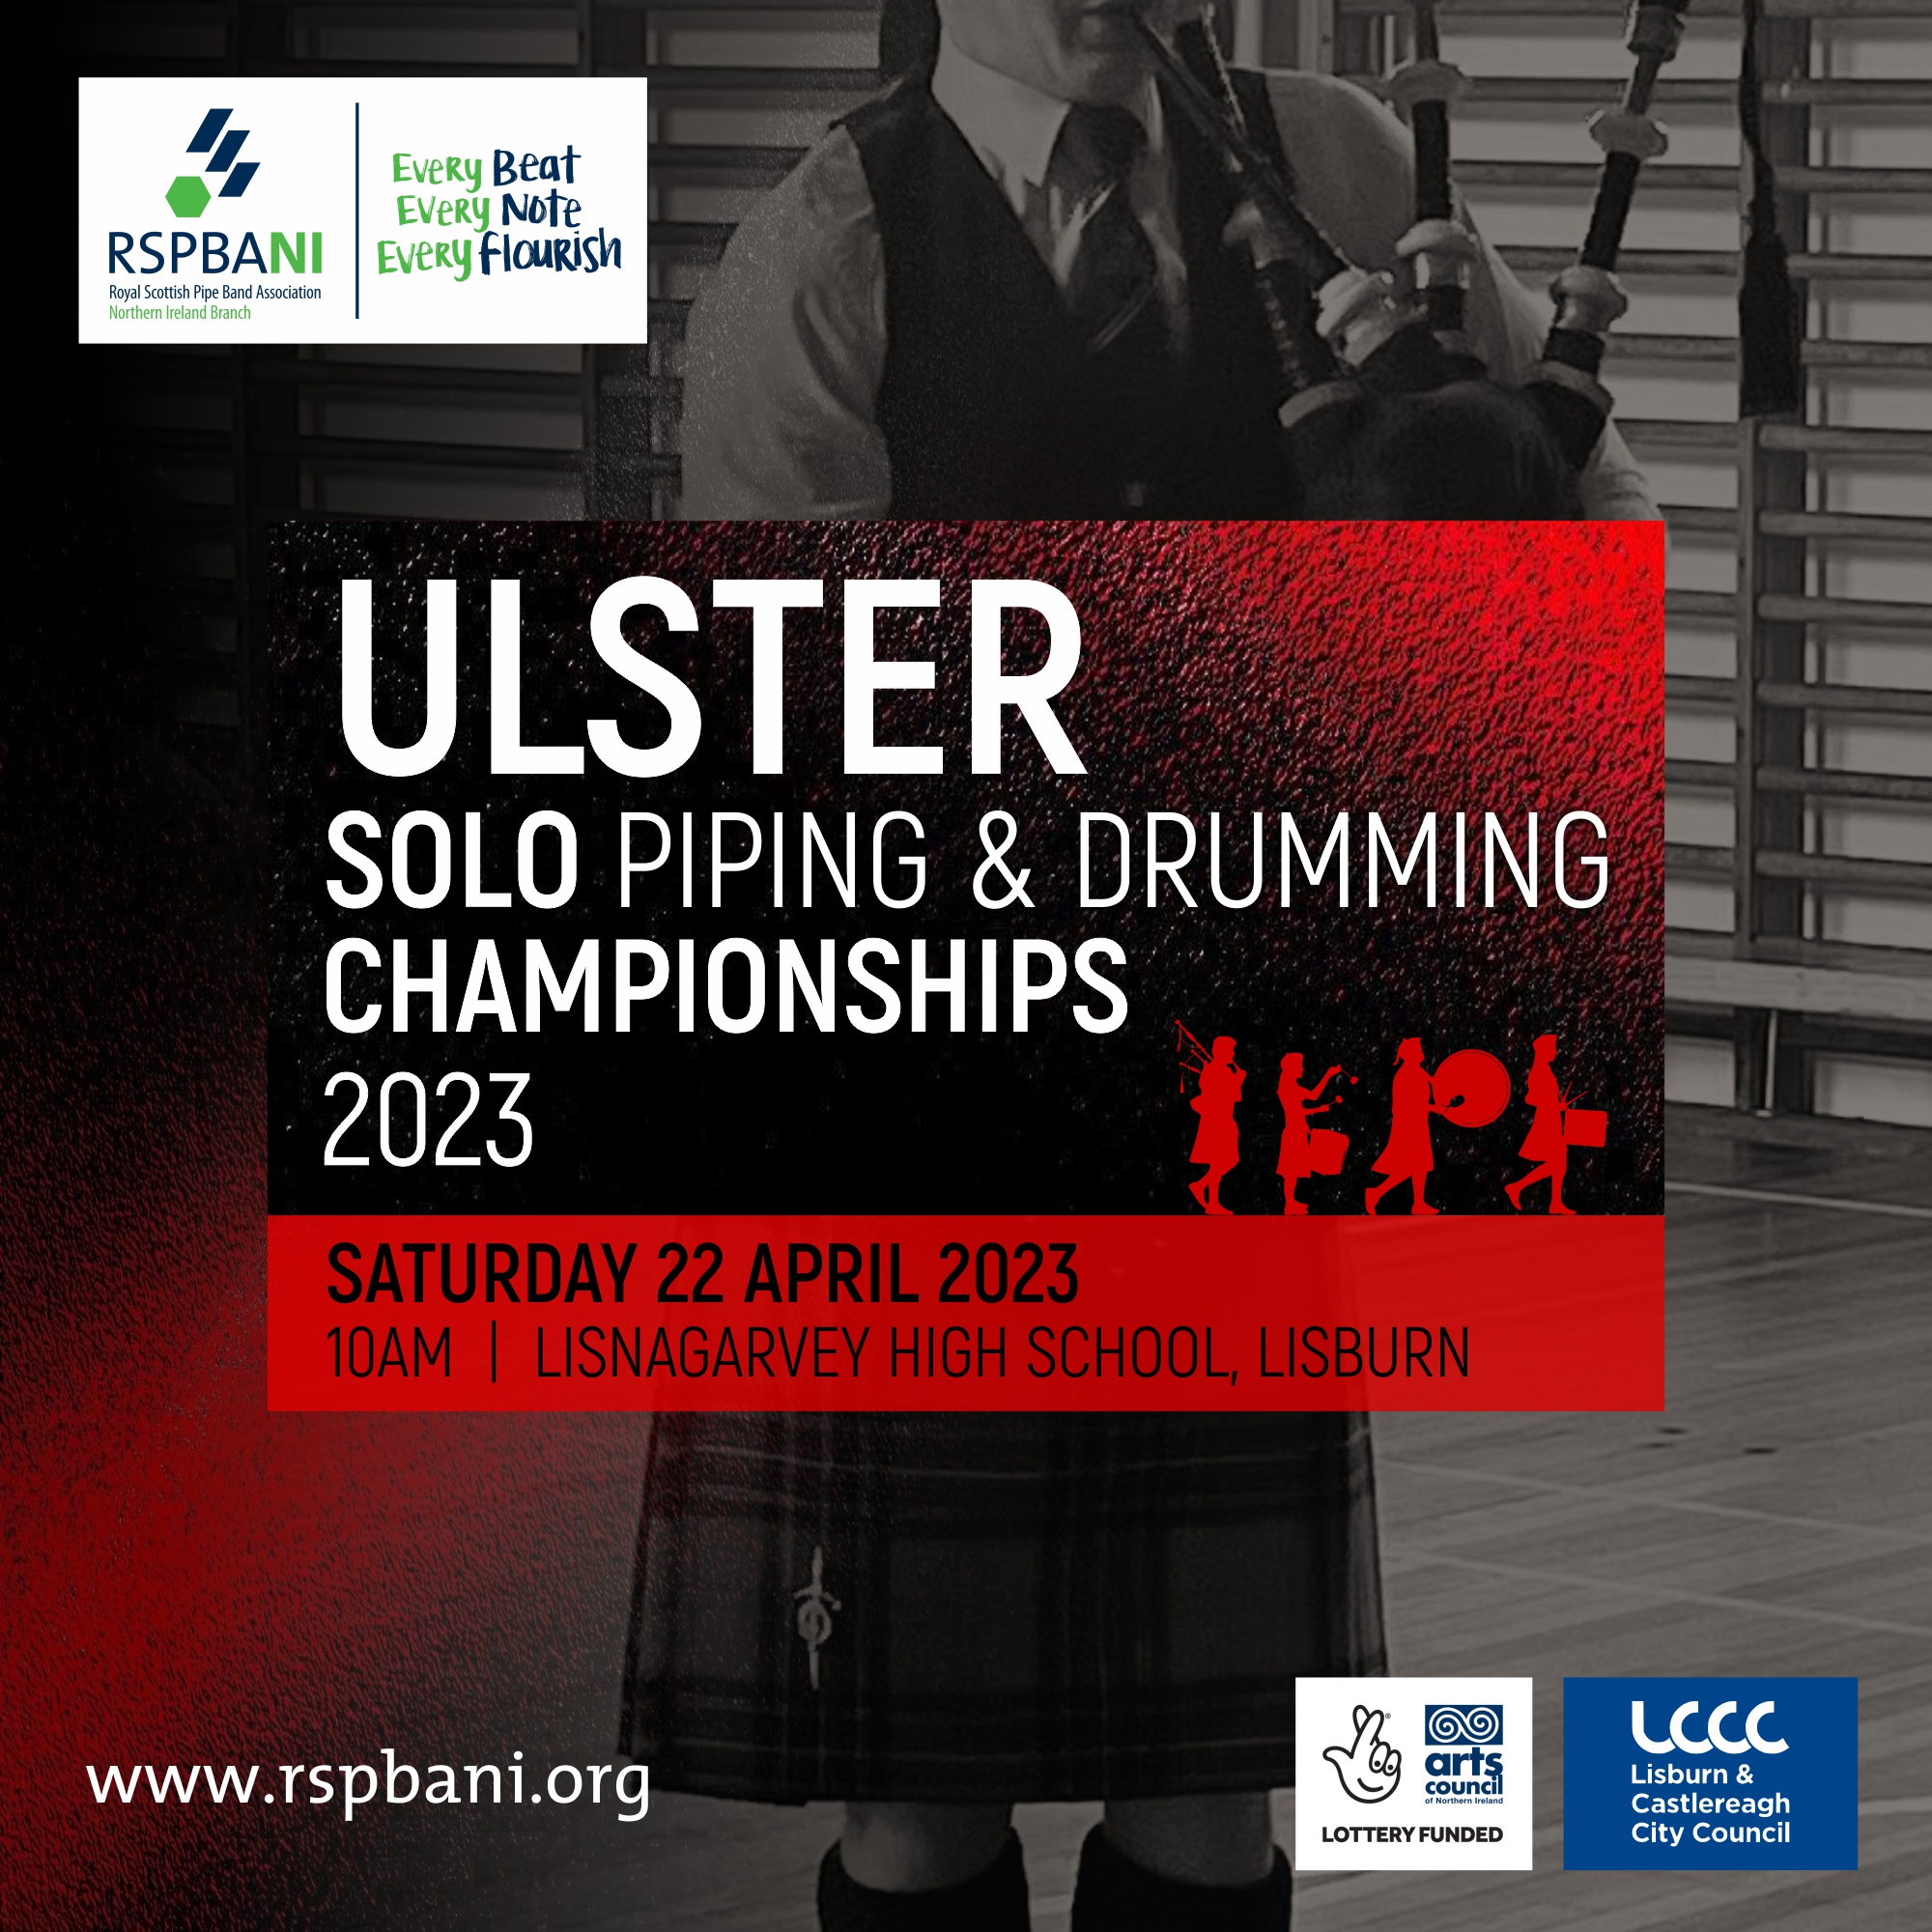 Ulster Solo Piping & Drumming Championships 2023